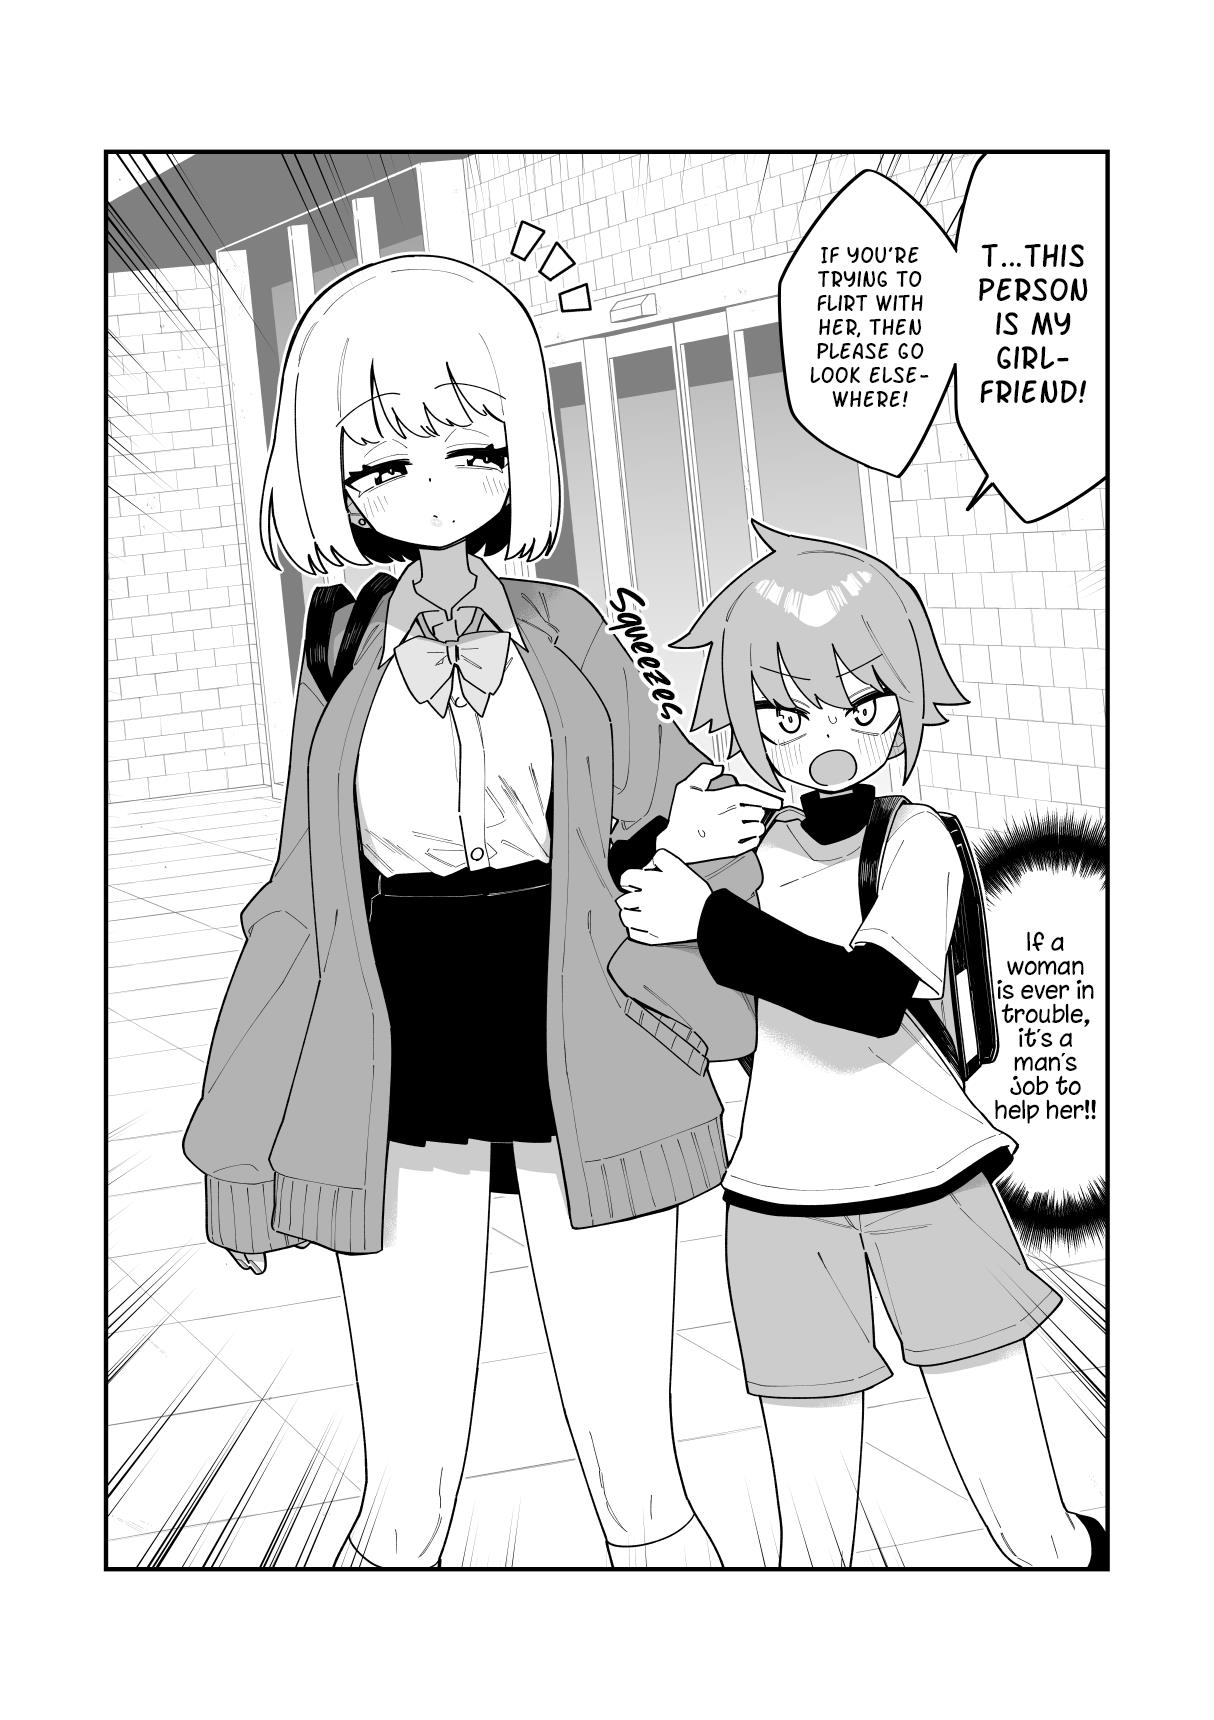 The Onee-San And The Shota: Before And After - Page 1